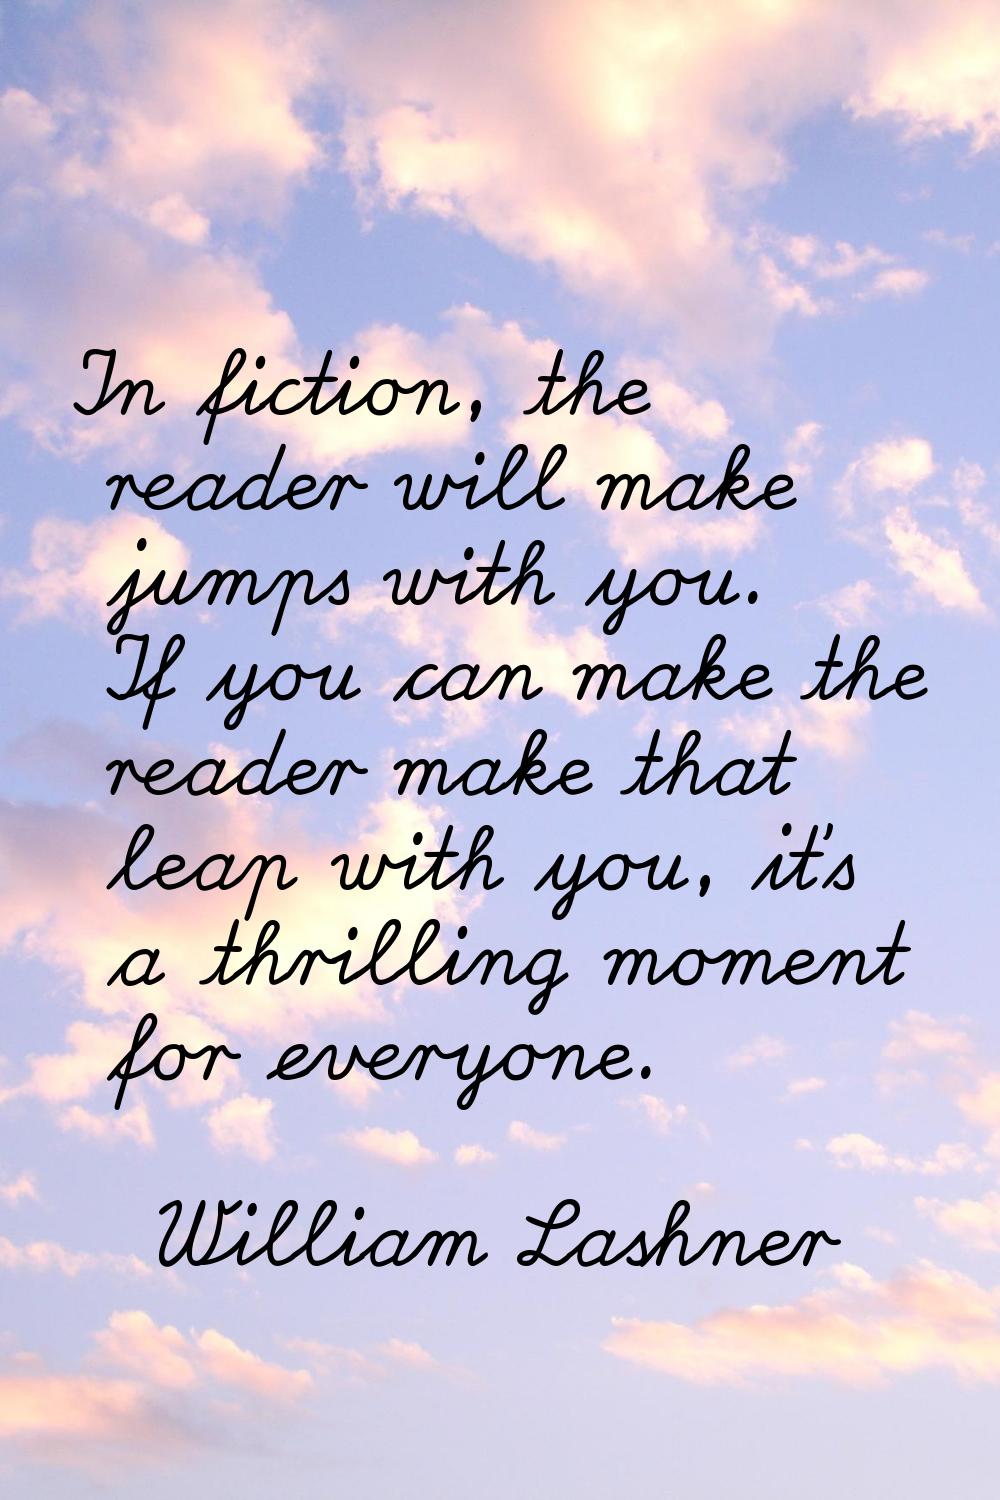 In fiction, the reader will make jumps with you. If you can make the reader make that leap with you